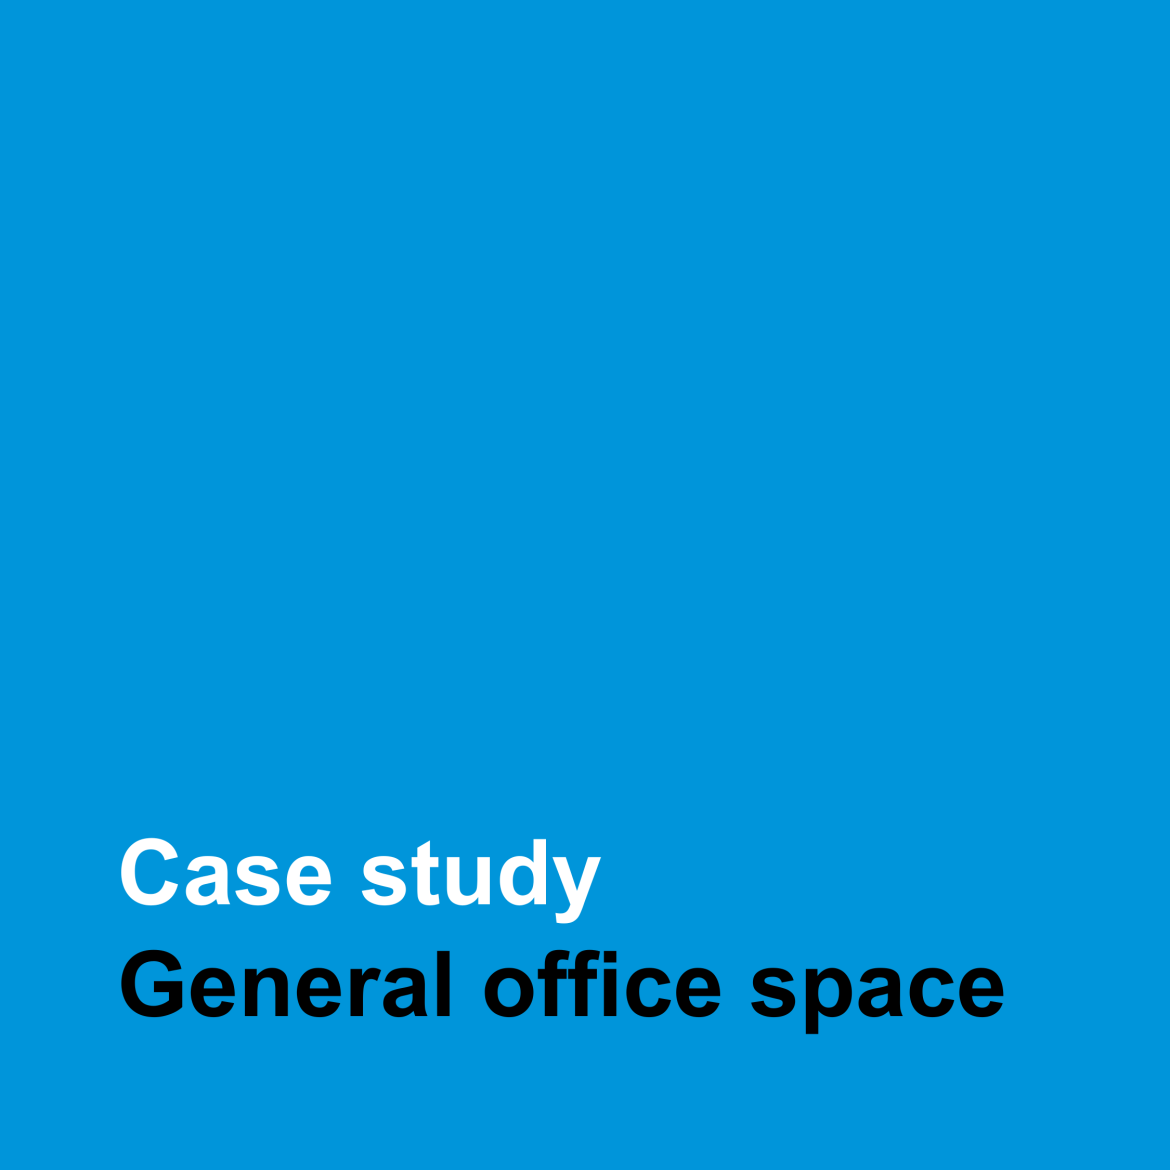 Case study about general office space